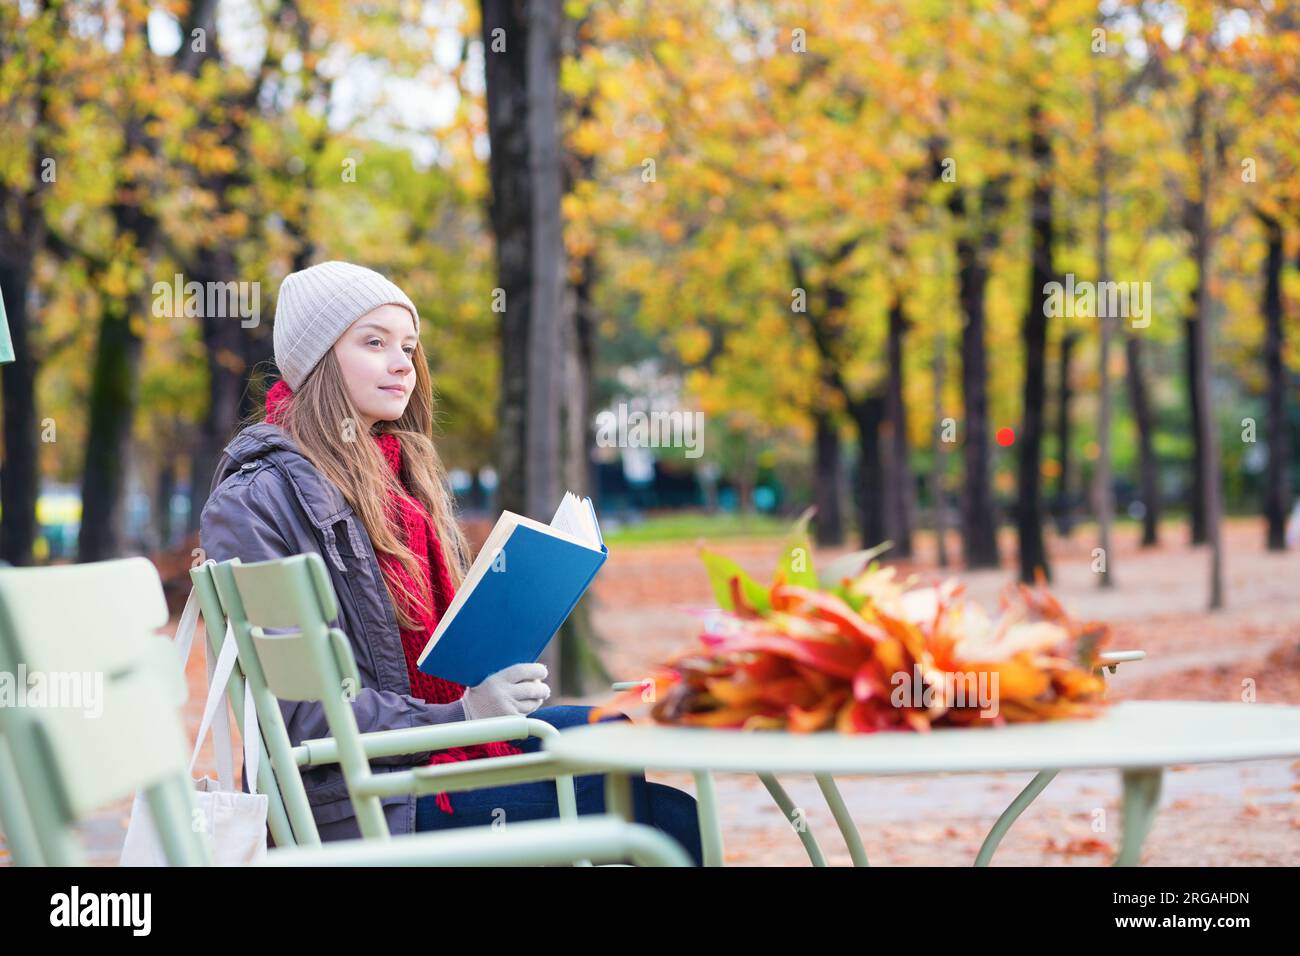 Girl reading a book in an outdoor cafe in Paris Stock Photo